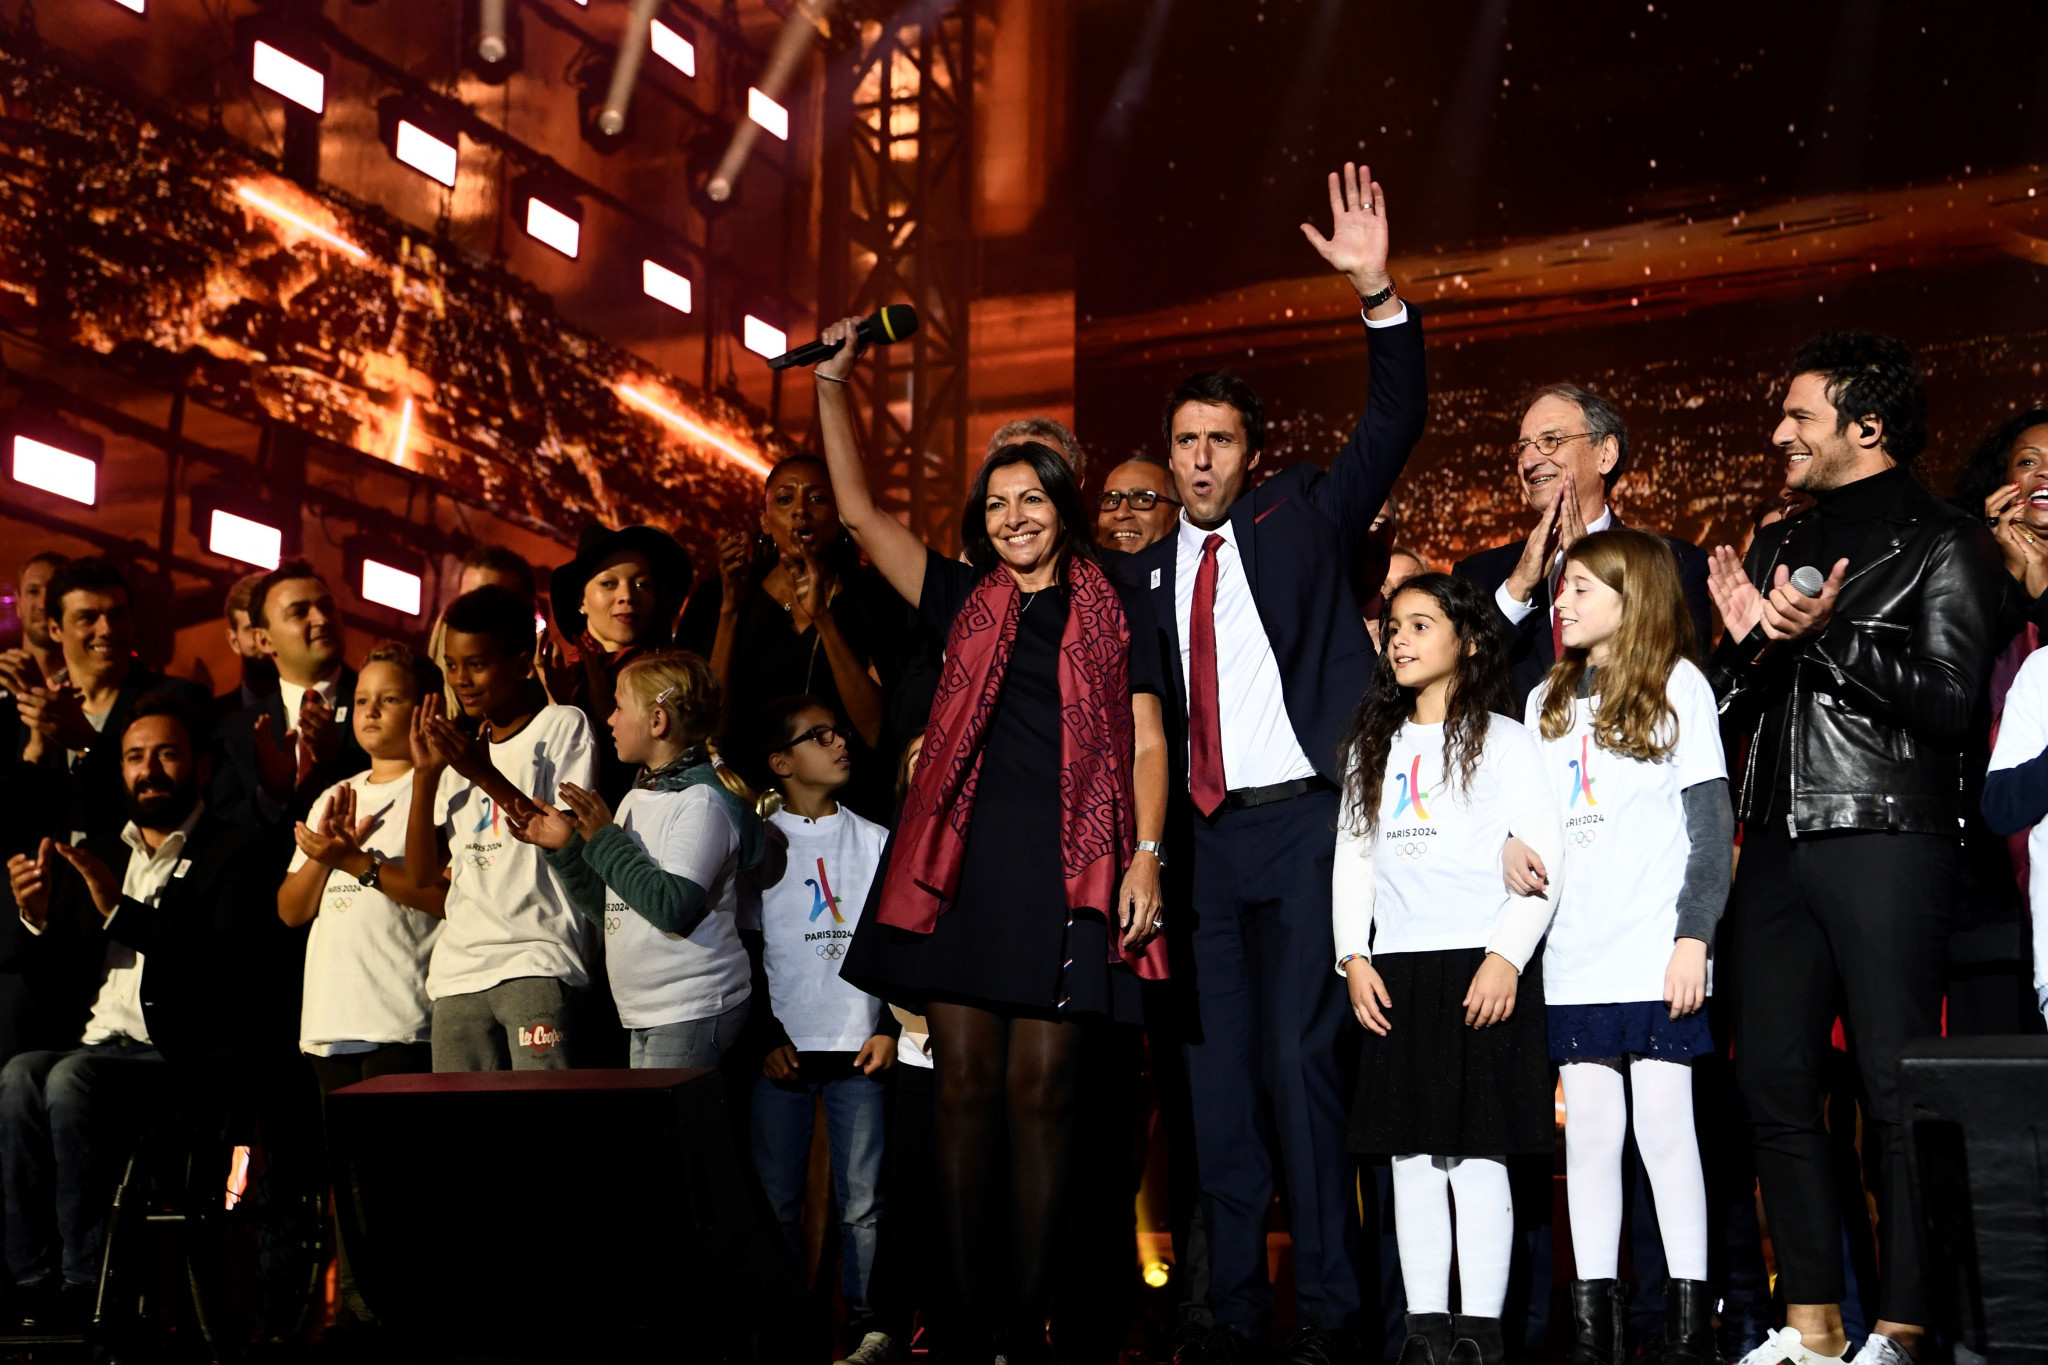 Paris 2024 hold celebratory concert after award of Olympic and